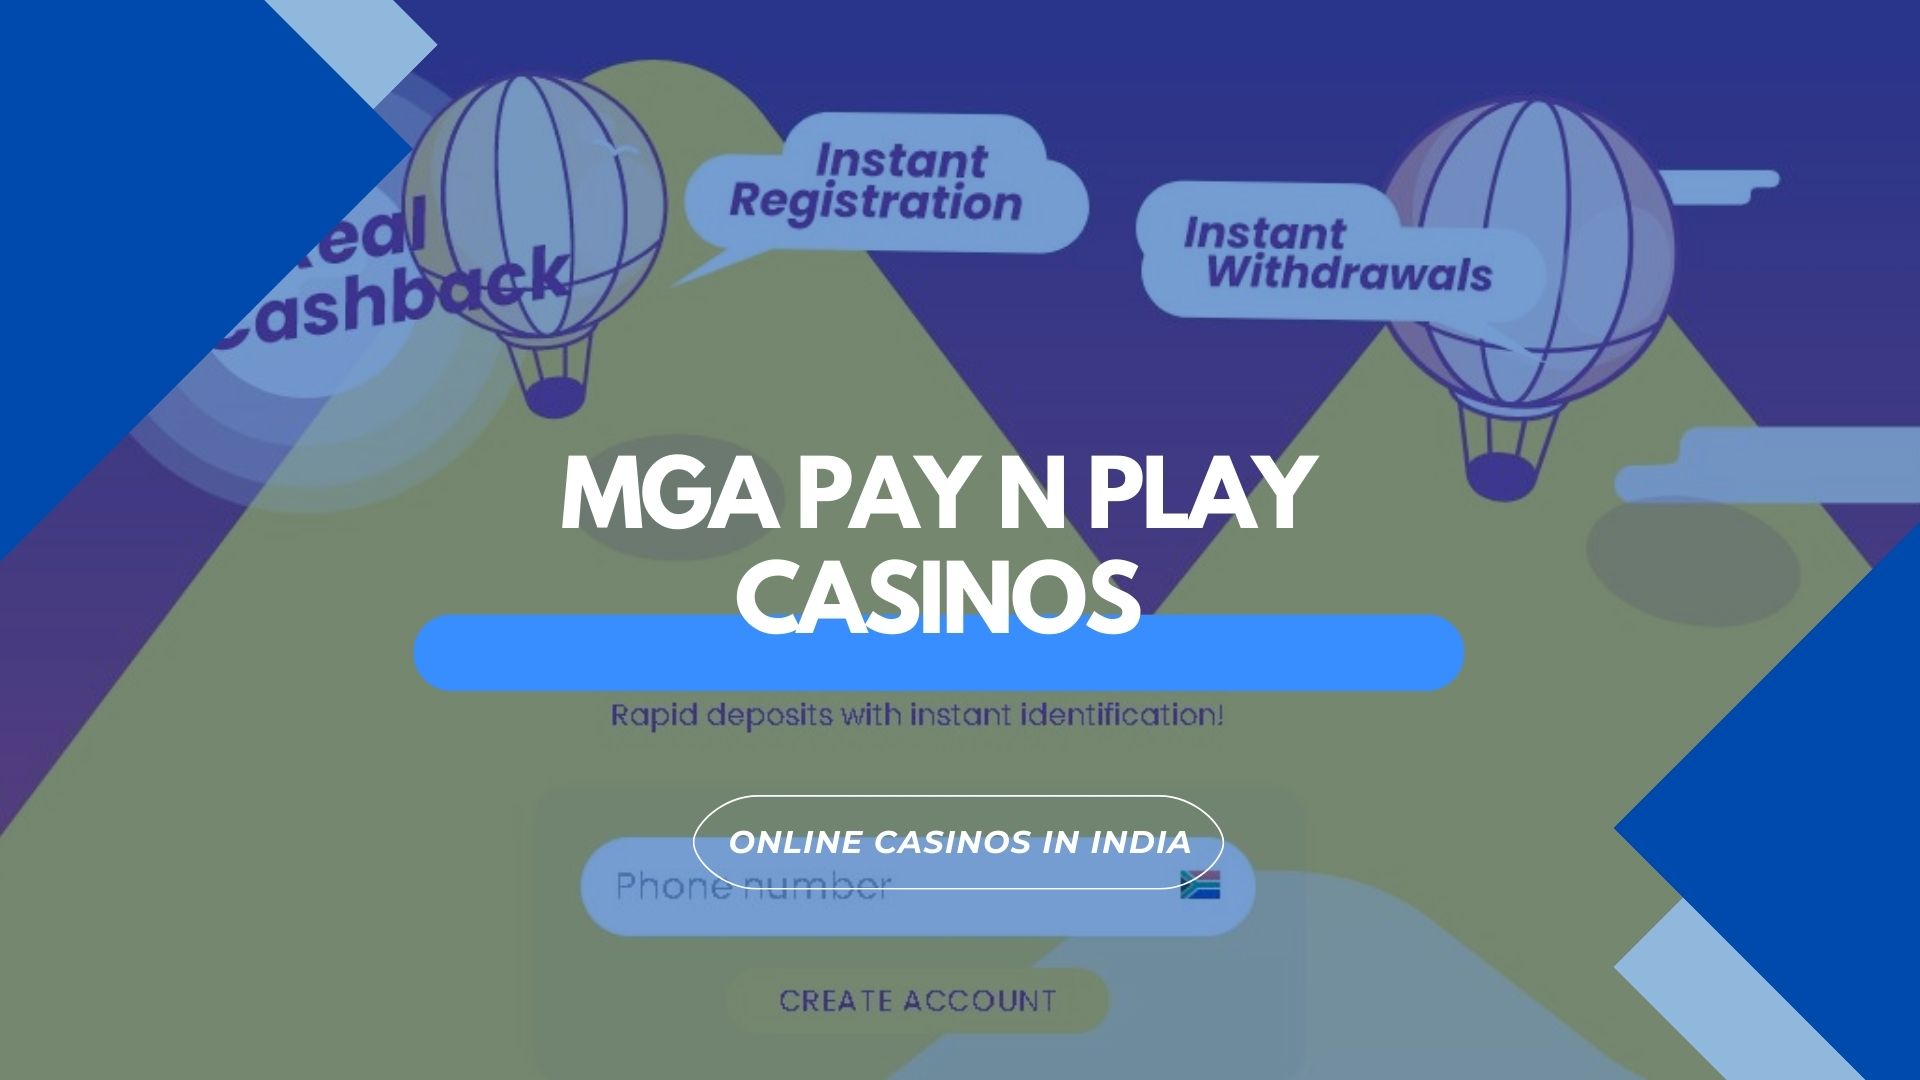 MGA Pay N Play Casinos and Their Potential in India